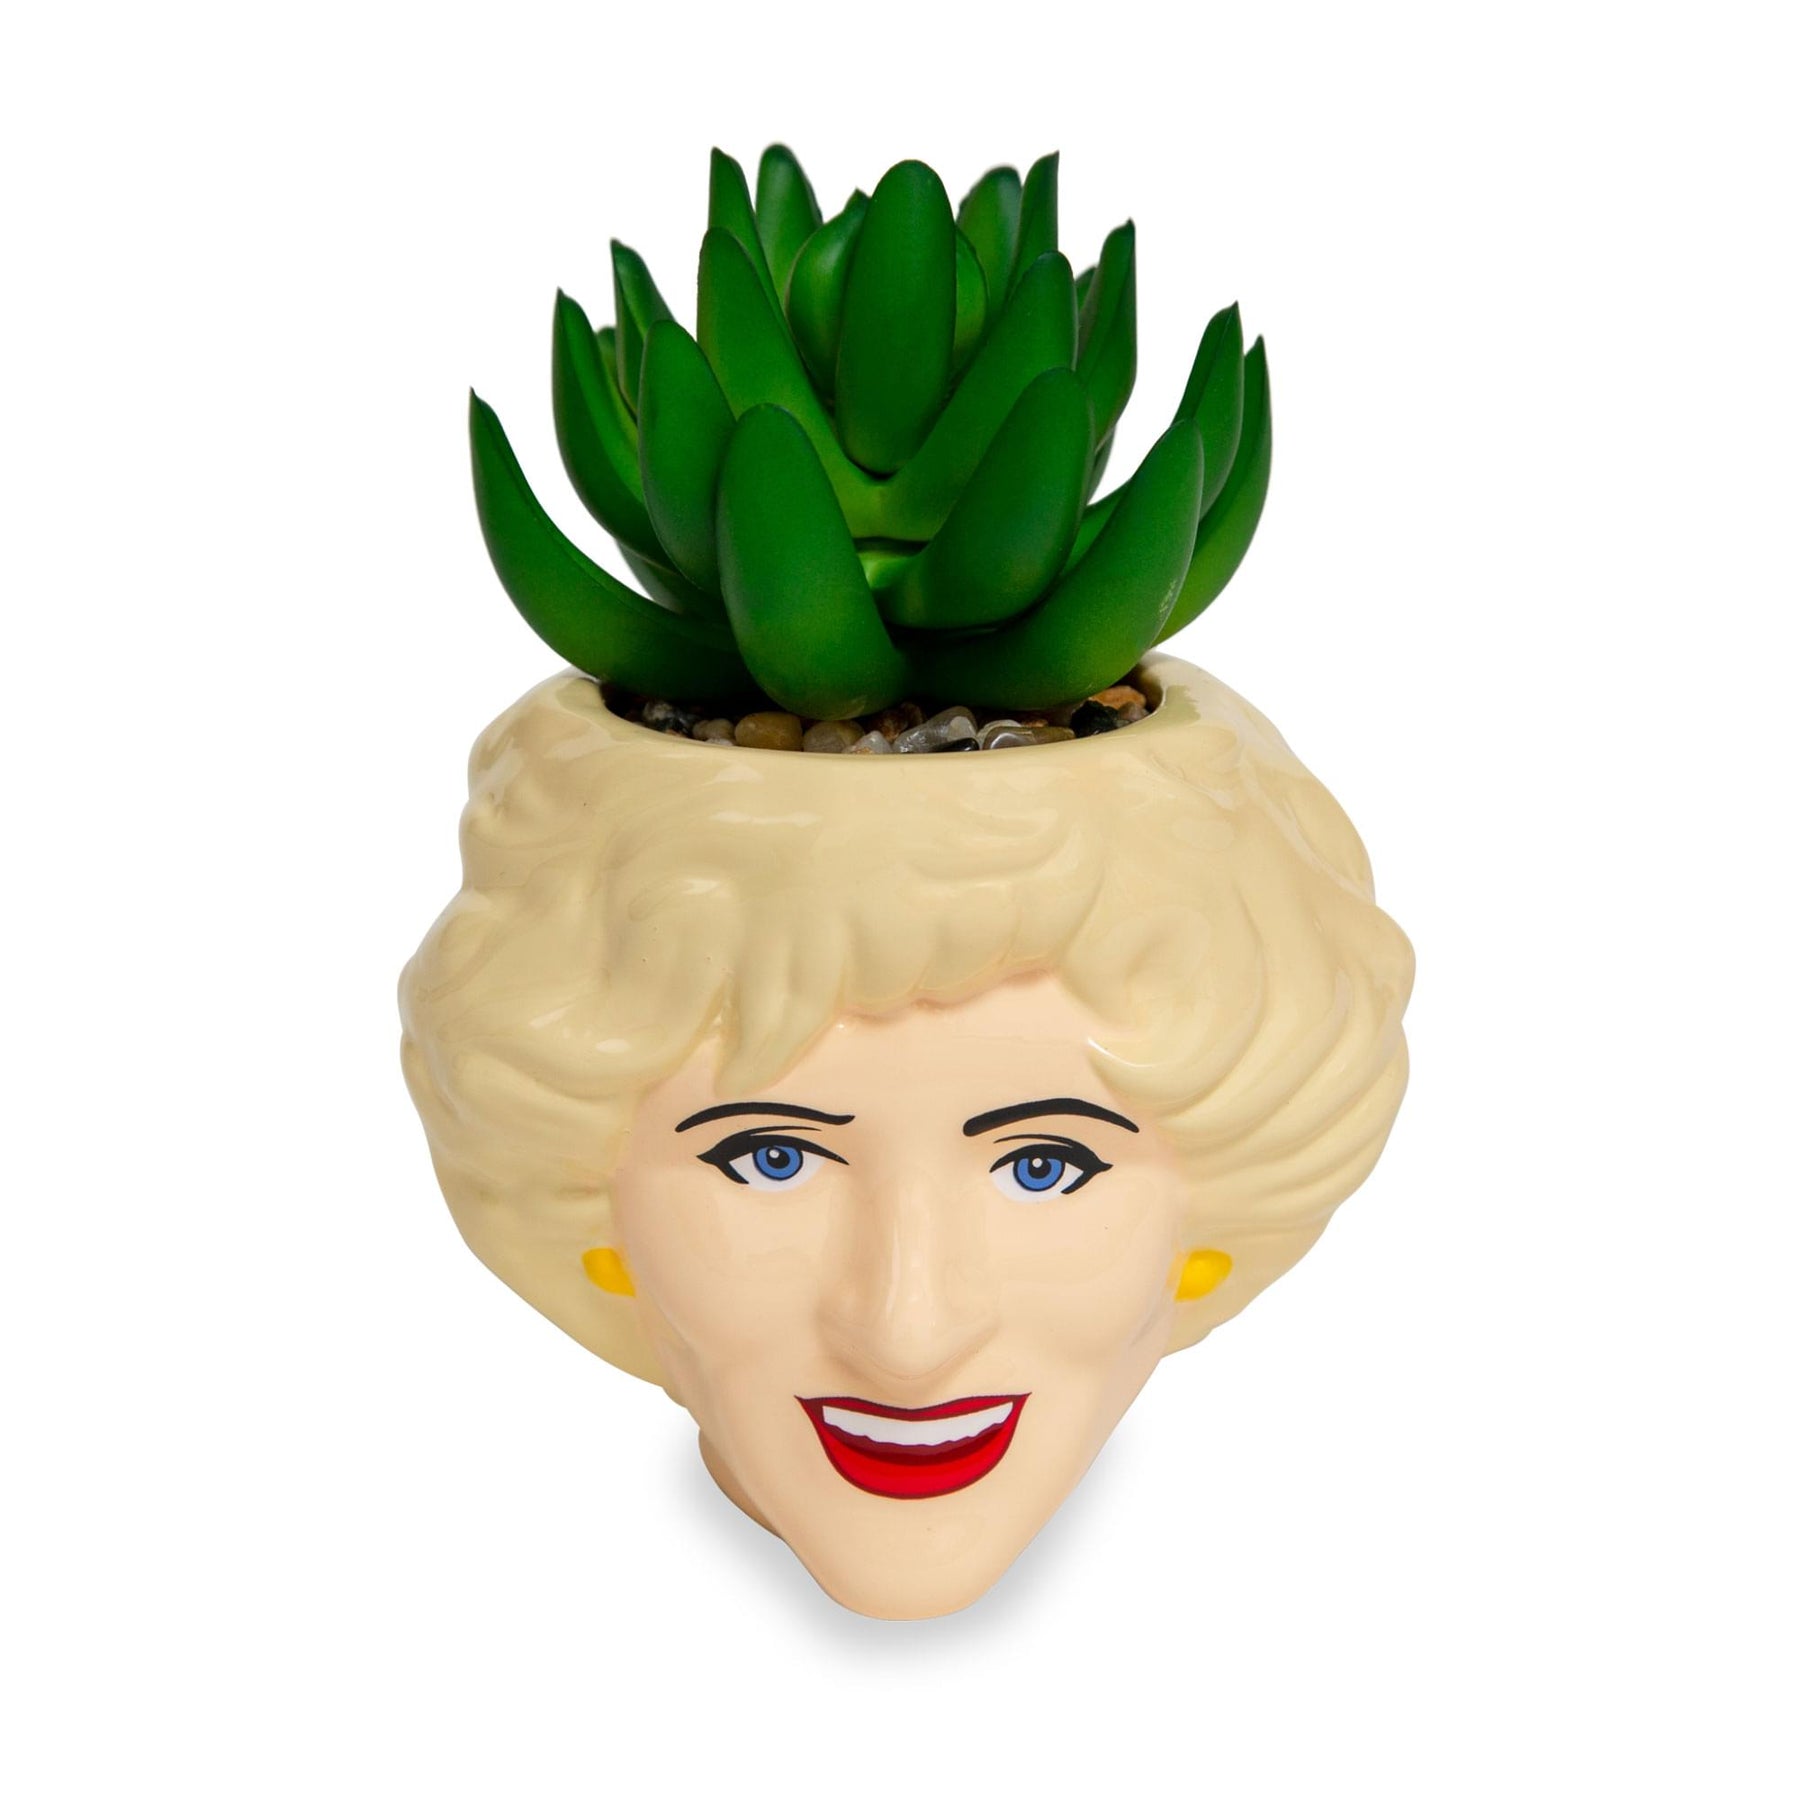 The Golden Girls Rose 3-Inch Ceramic Mini Planter With Artificial Succulent